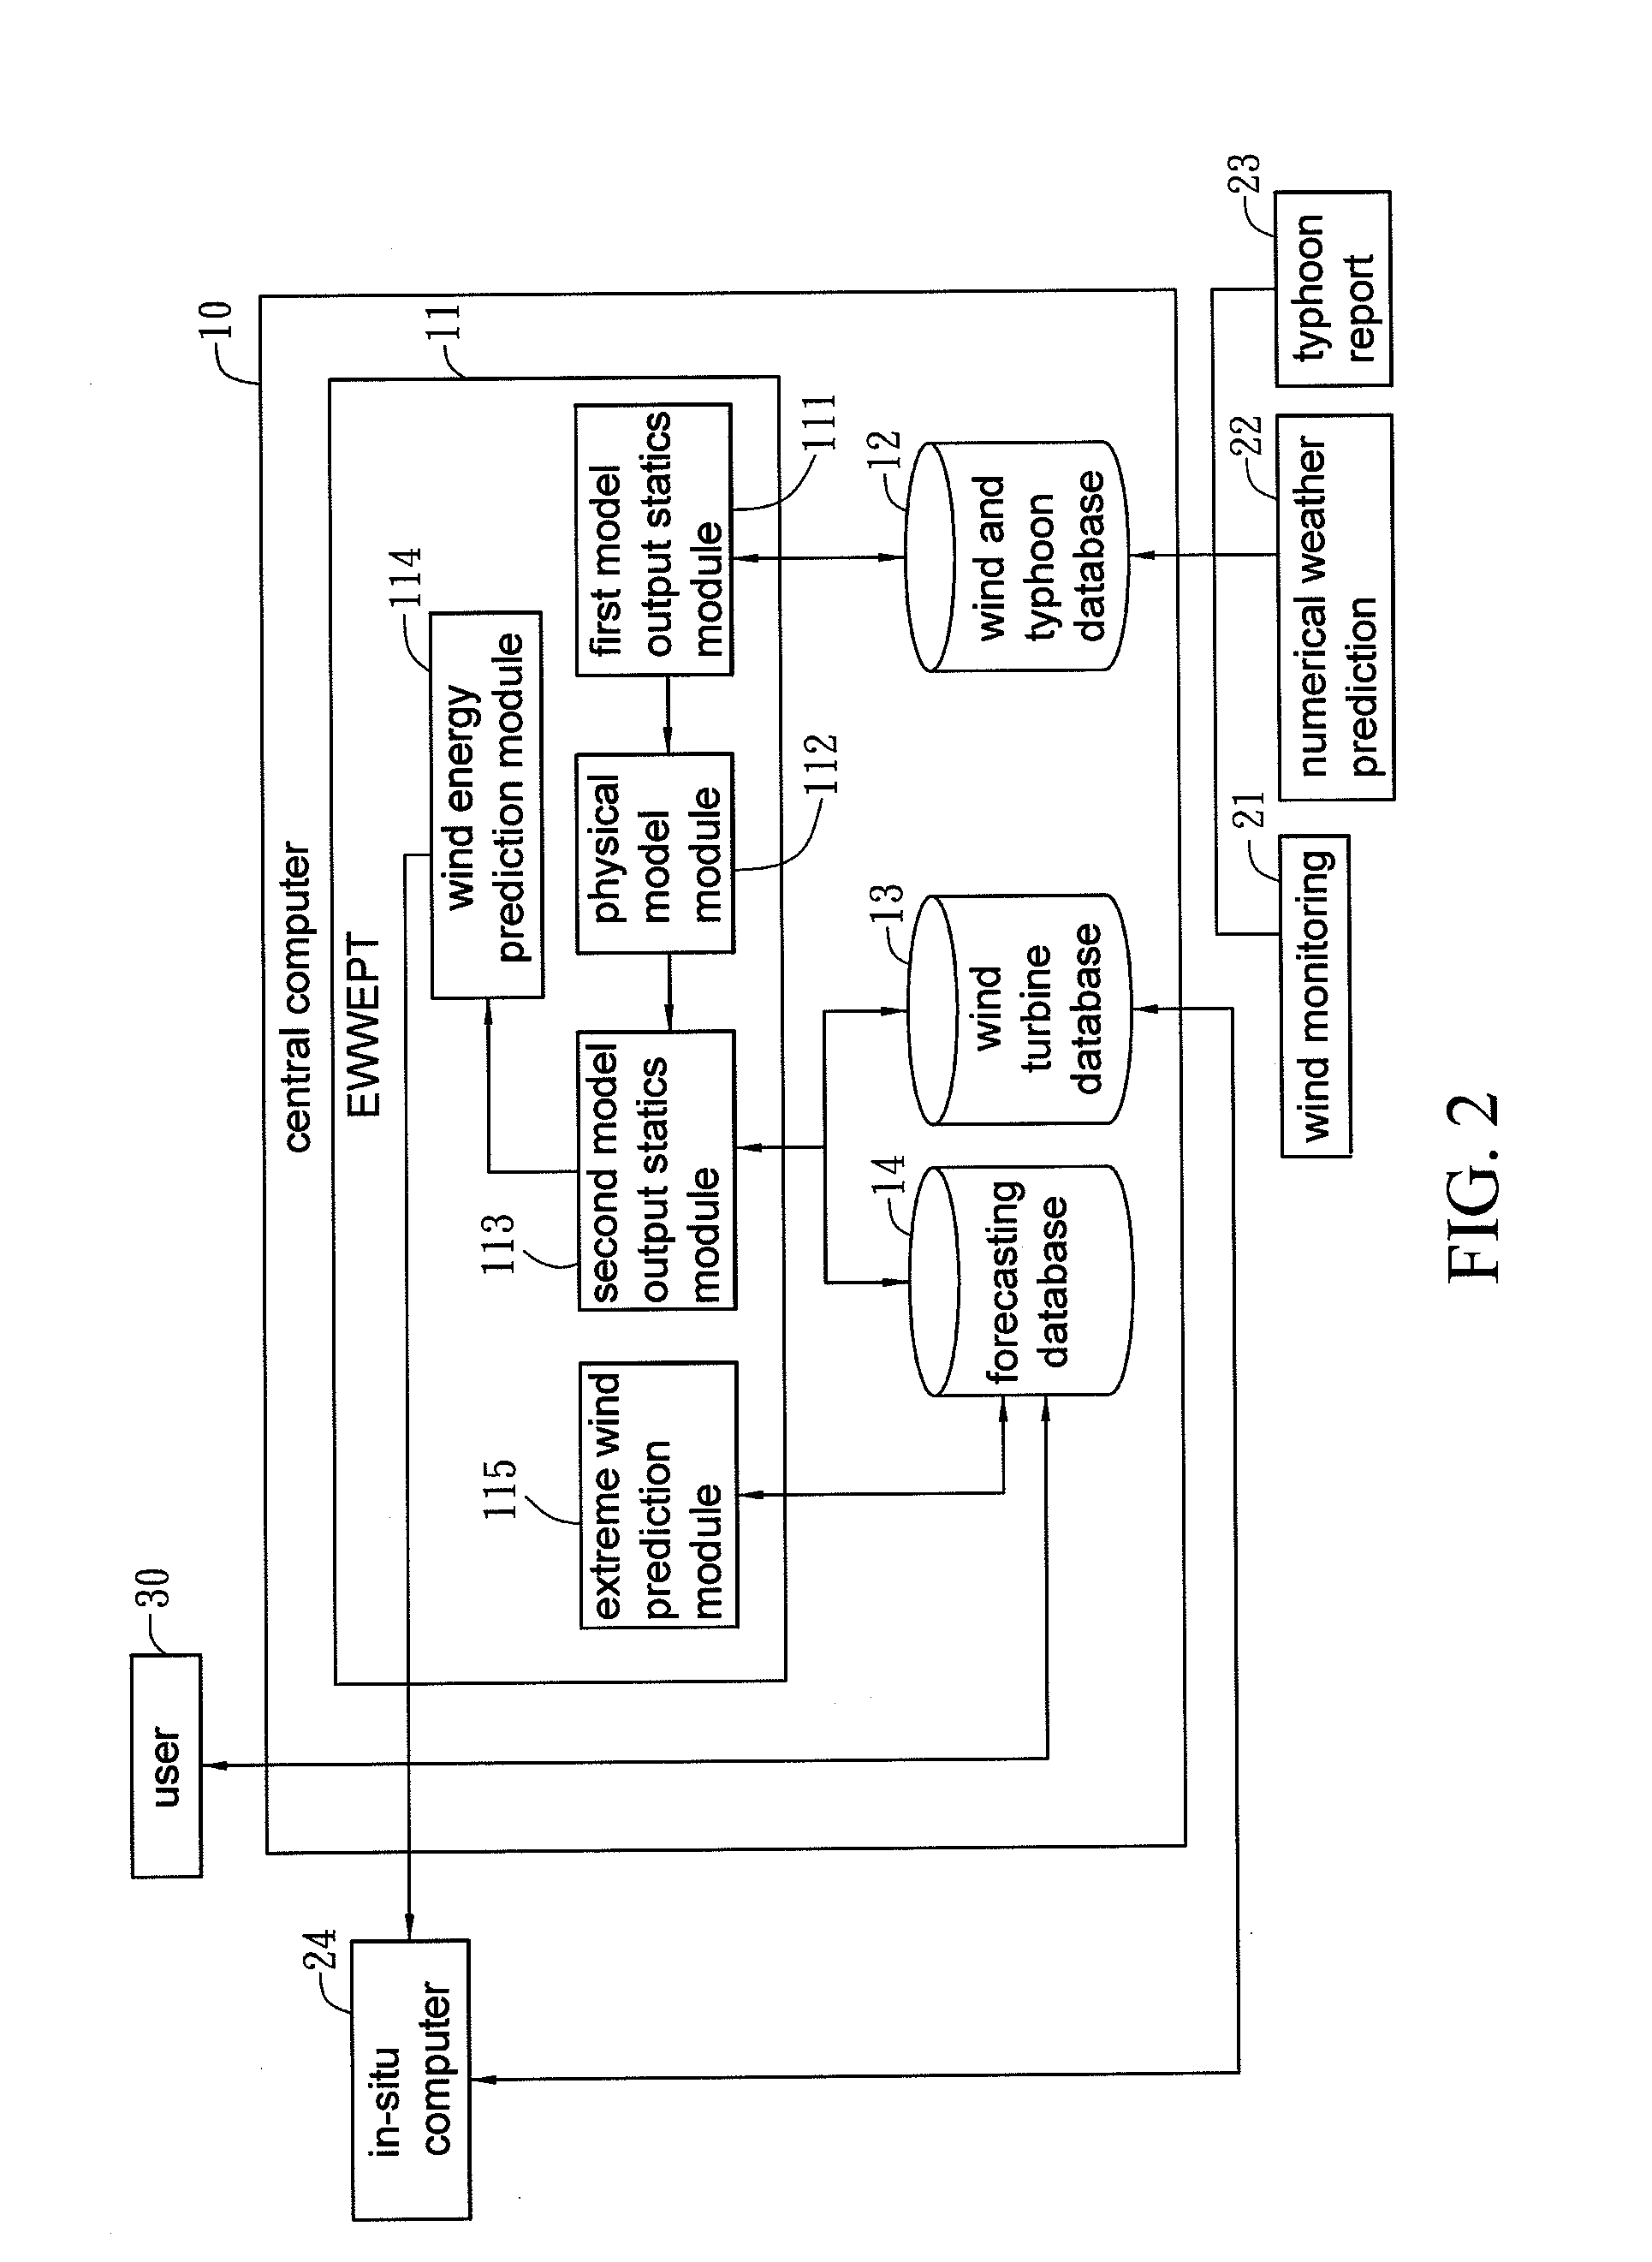 Wind energy forecasting method with extreme wind speed prediction function